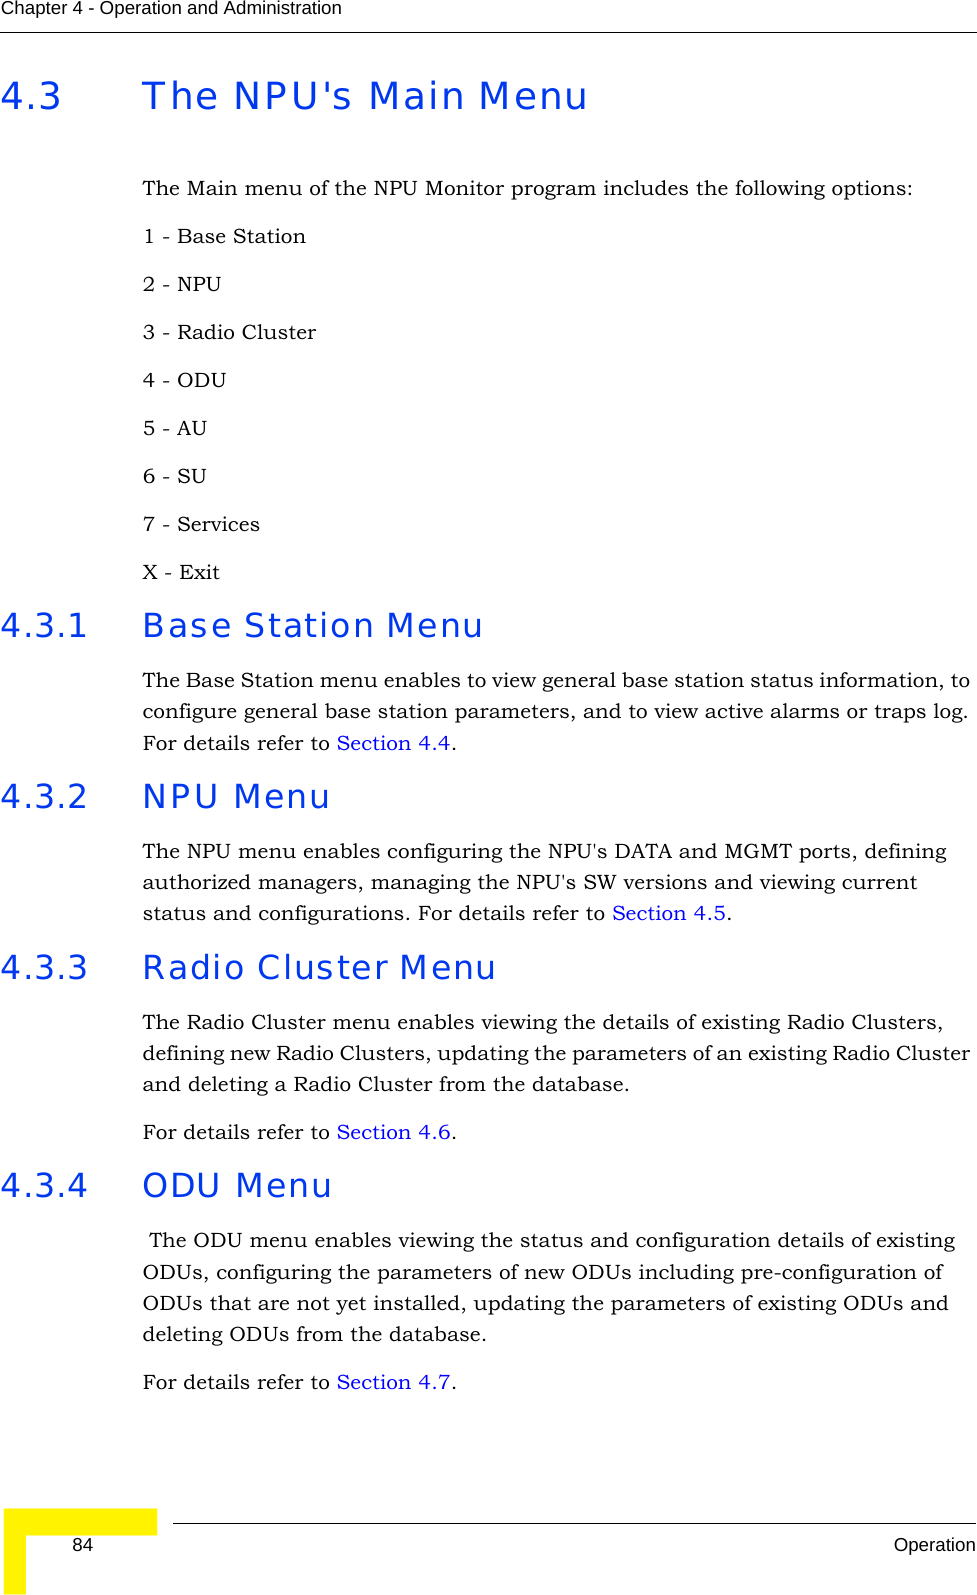  84 OperationChapter 4 - Operation and Administration4.3 The NPU&apos;s Main MenuThe Main menu of the NPU Monitor program includes the following options:1 - Base Station2 - NPU3 - Radio Cluster4 - ODU5 - AU6 - SU7 - ServicesX - Exit4.3.1 Base Station Menu The Base Station menu enables to view general base station status information, to configure general base station parameters, and to view active alarms or traps log. For details refer to Section 4.4. 4.3.2 NPU Menu The NPU menu enables configuring the NPU&apos;s DATA and MGMT ports, defining authorized managers, managing the NPU&apos;s SW versions and viewing current status and configurations. For details refer to Section 4.5.4.3.3 Radio Cluster MenuThe Radio Cluster menu enables viewing the details of existing Radio Clusters, defining new Radio Clusters, updating the parameters of an existing Radio Cluster and deleting a Radio Cluster from the database.For details refer to Section 4.6.4.3.4 ODU Menu The ODU menu enables viewing the status and configuration details of existing ODUs, configuring the parameters of new ODUs including pre-configuration of ODUs that are not yet installed, updating the parameters of existing ODUs and deleting ODUs from the database.For details refer to Section 4.7.